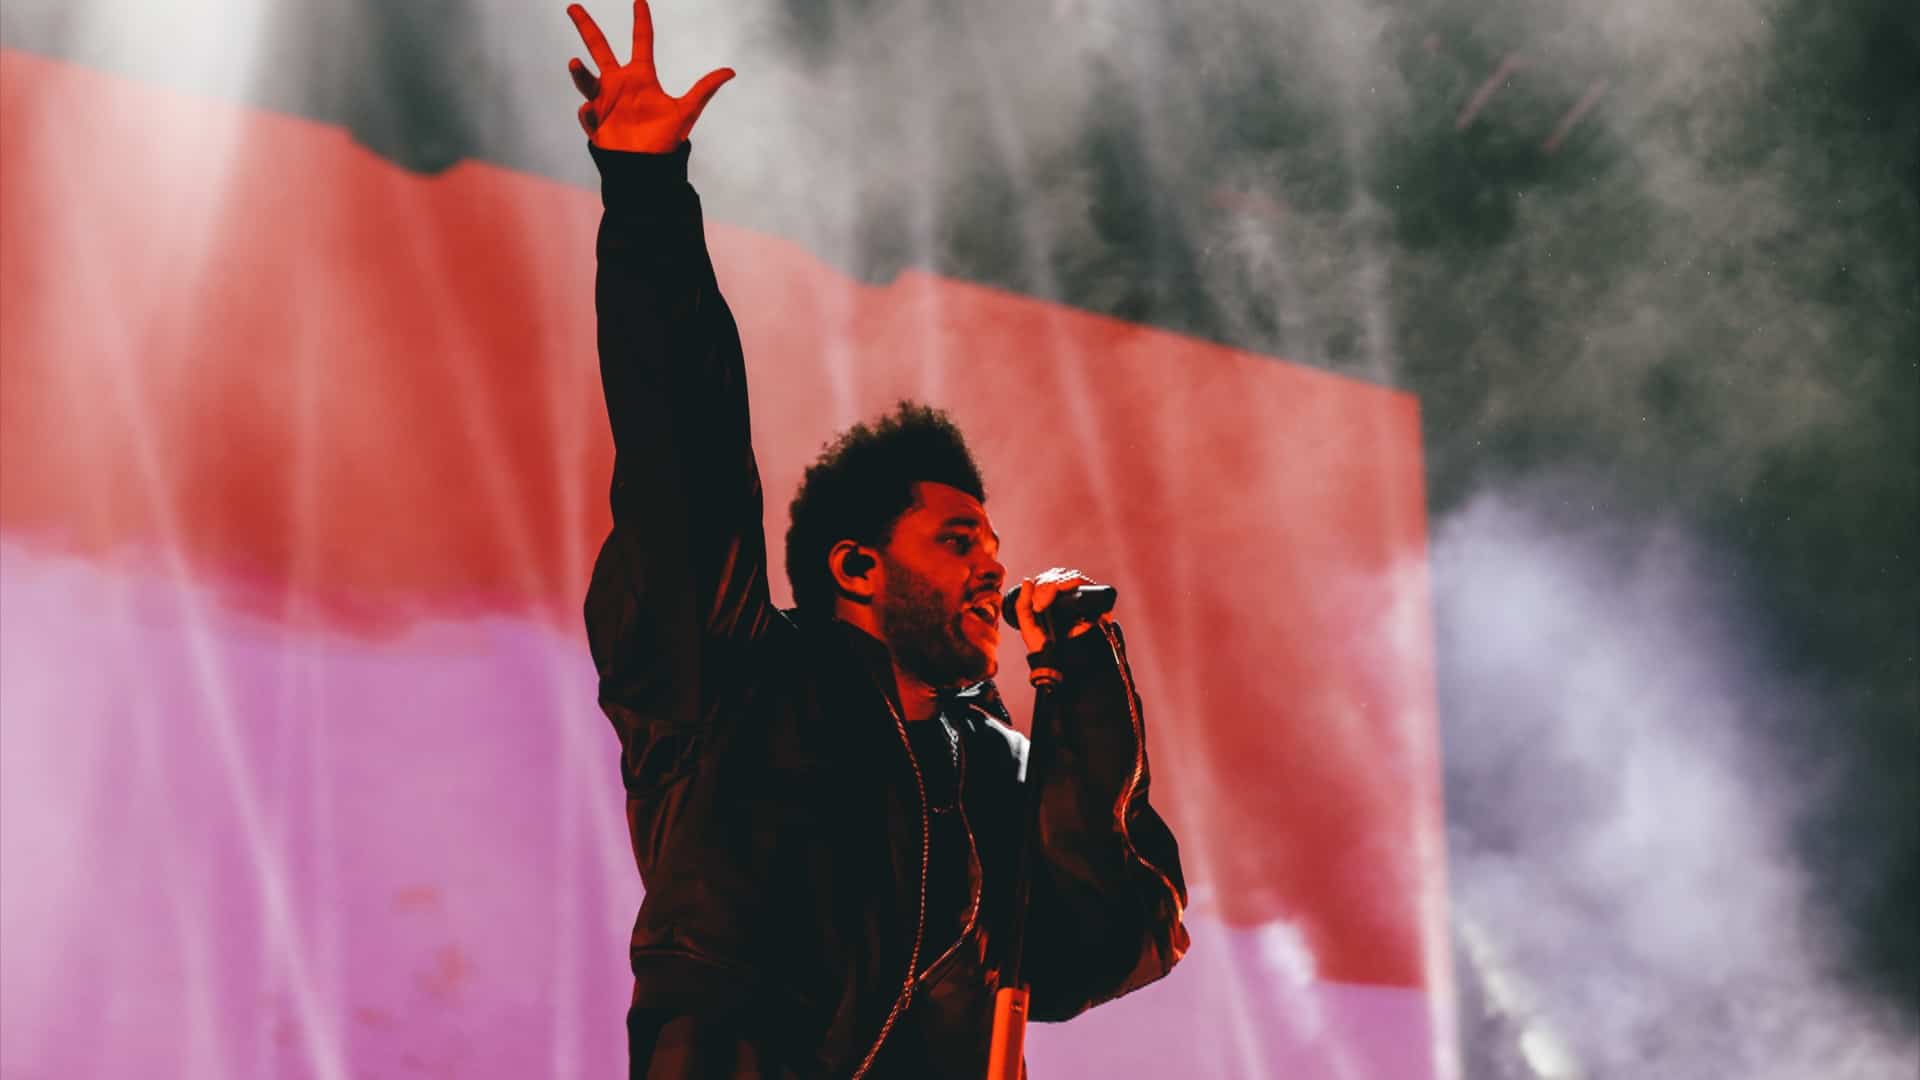 The Weeknd’s ‘Blinding Lights’ is the most streamed song of all time on Spotify